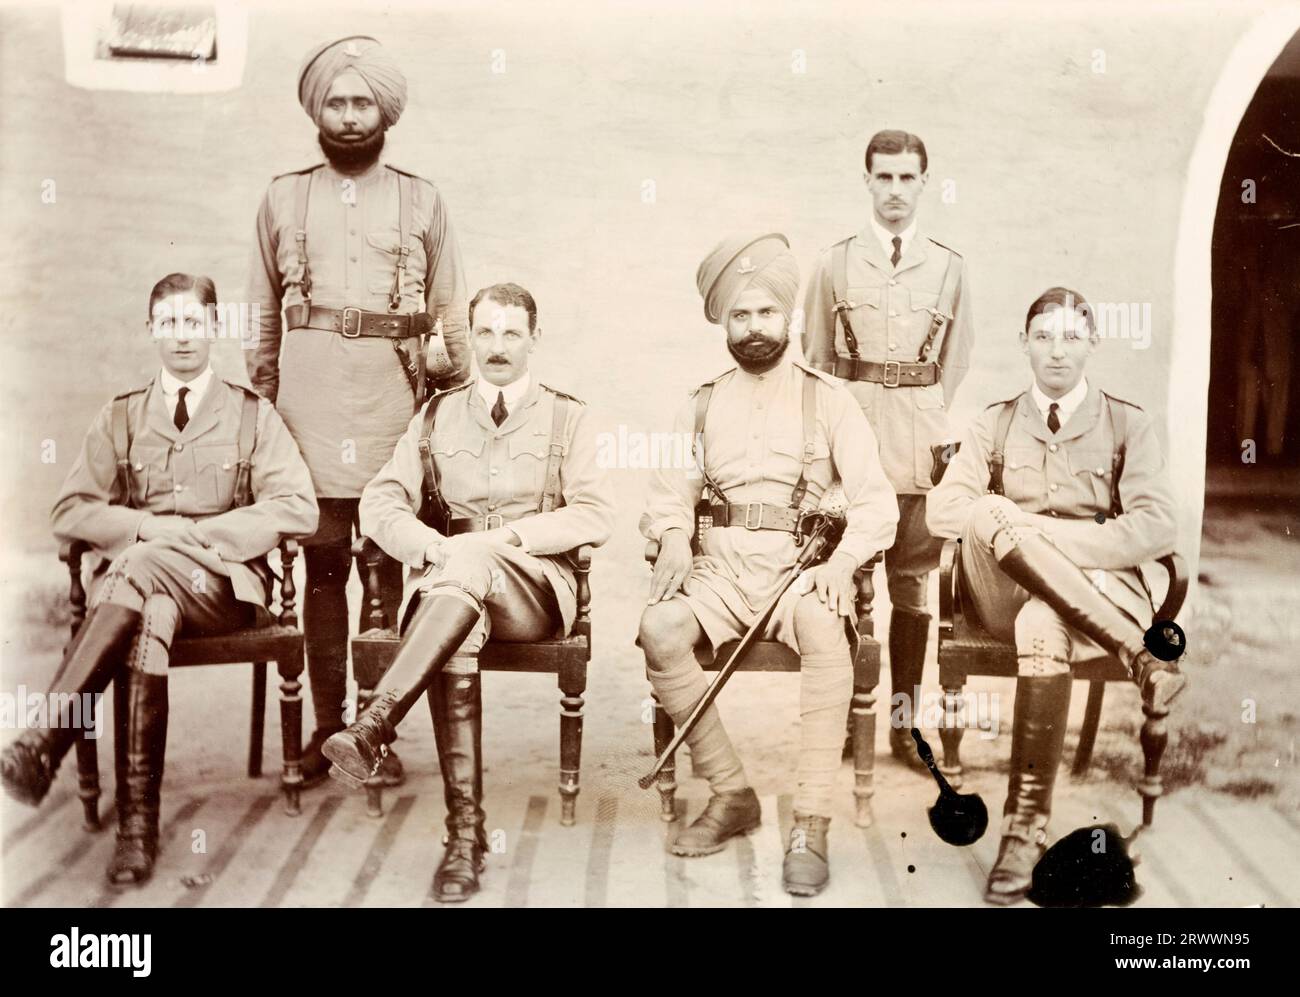 Six VCOs (Viceroy's Commissioned Officers) of the Indian Army pose for a group portrait dressed in military uniform in Multan, Punjab, where Winthrop was posted directly after receiving his commission.   Original manuscript caption: MULTAN 1916 H.E.W.  Jem Gujian Singh M.W. Sub Naram Singh  C.A. Keatings G.D.P. Stock Photo